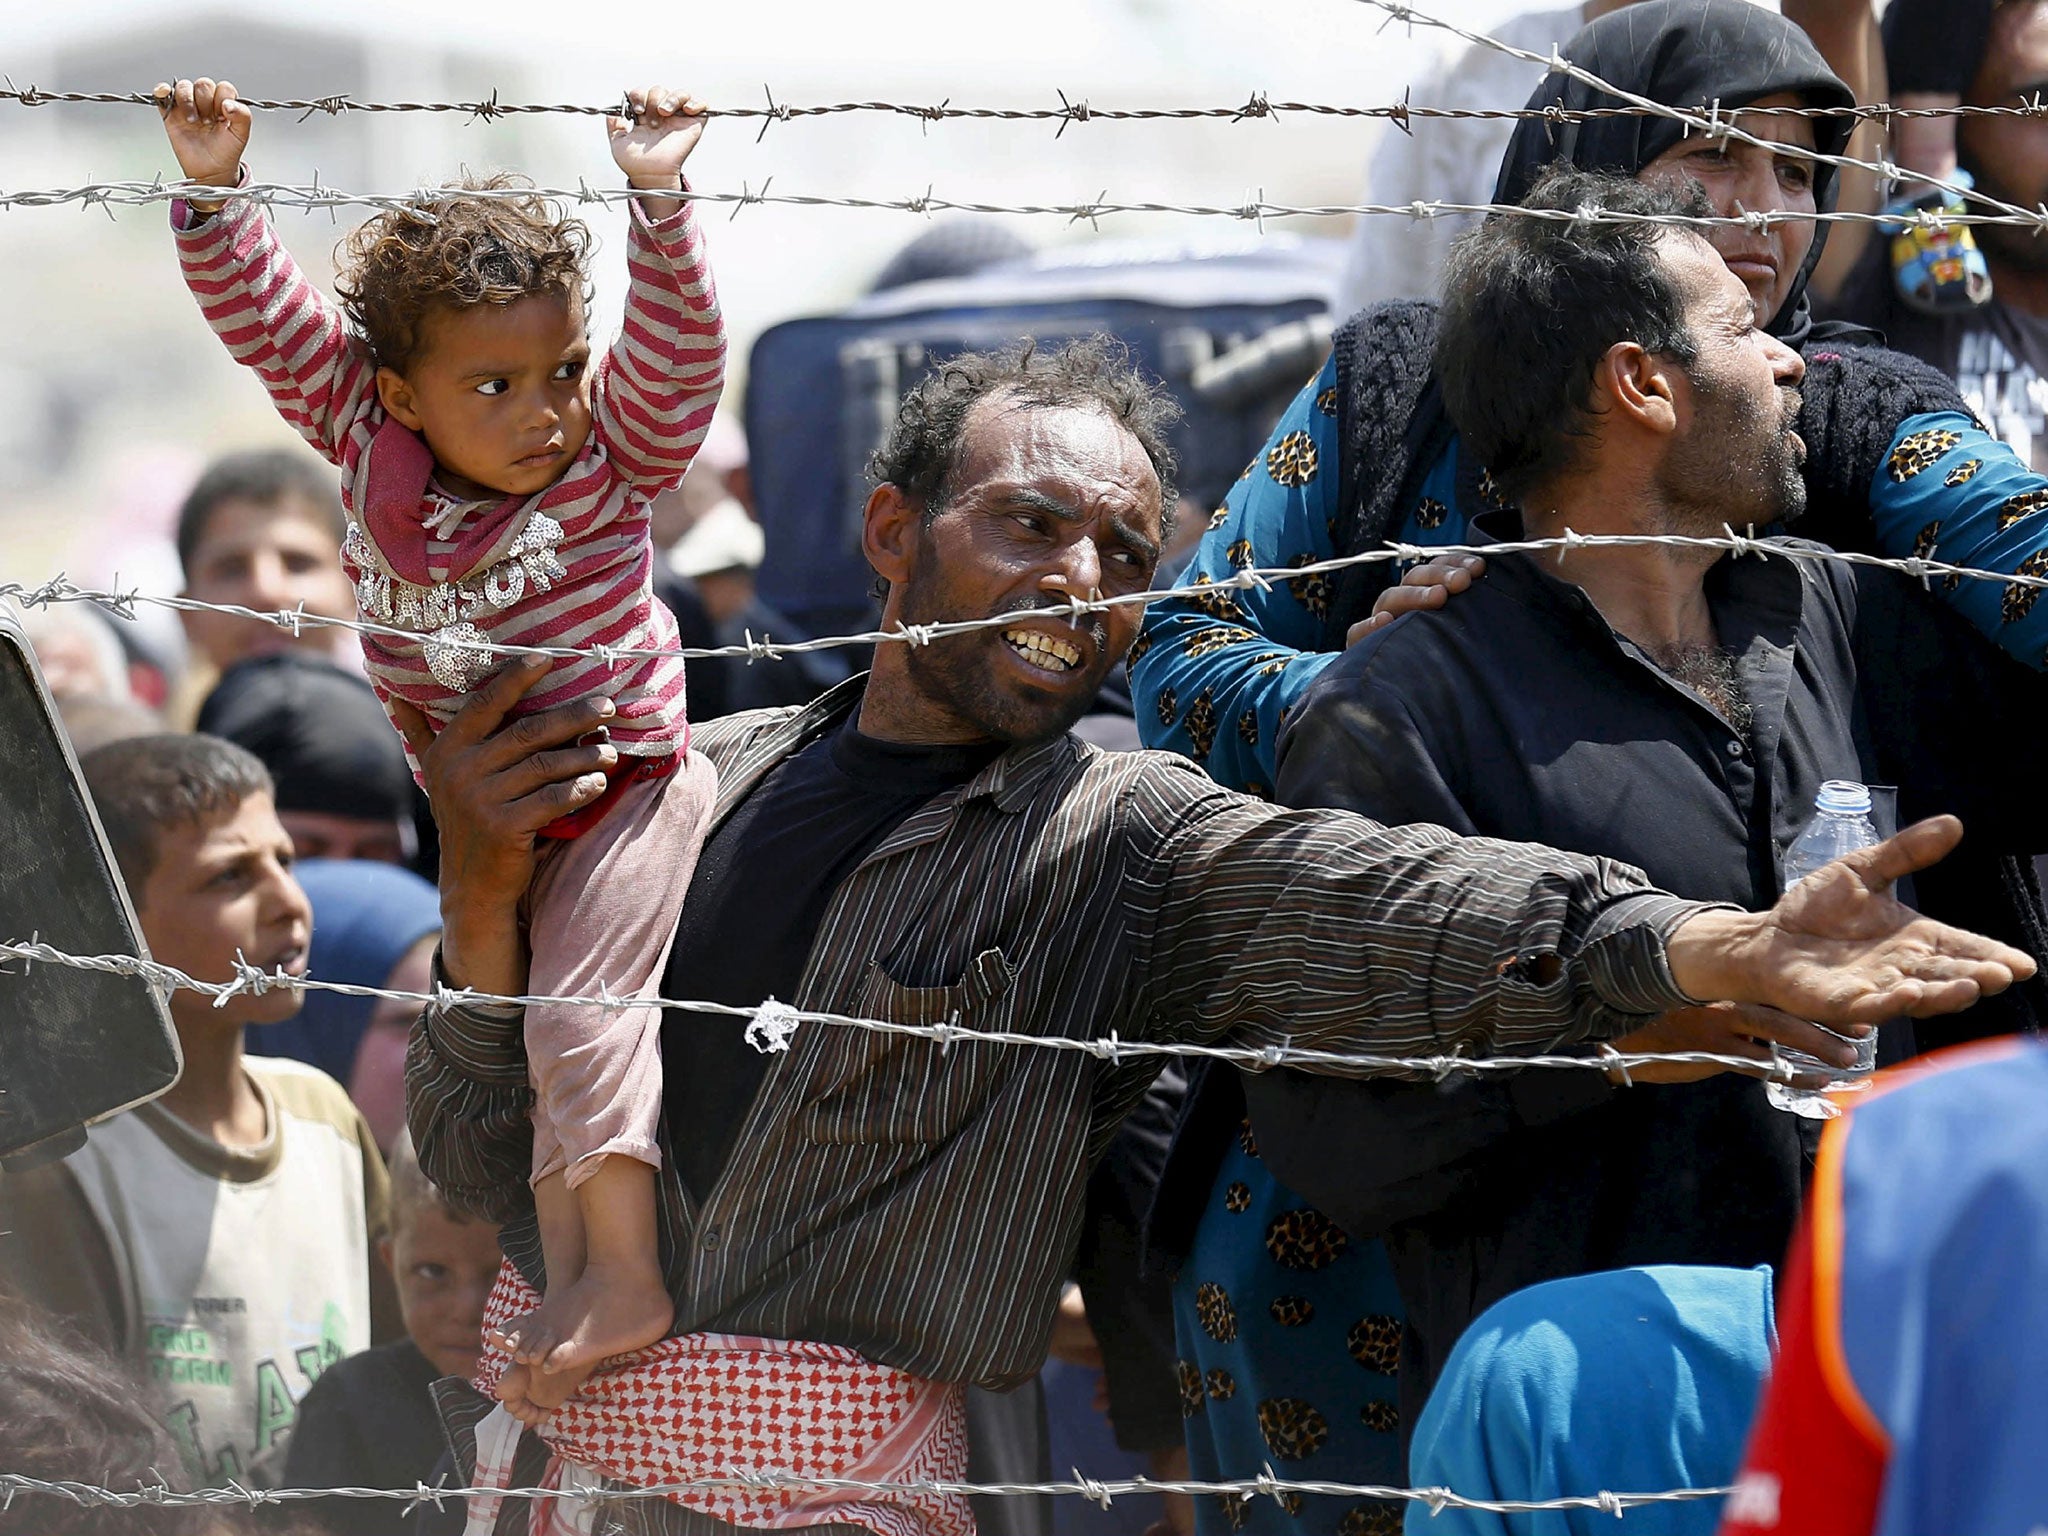 Most of the world's refugees are currently fleeing the Syrian war